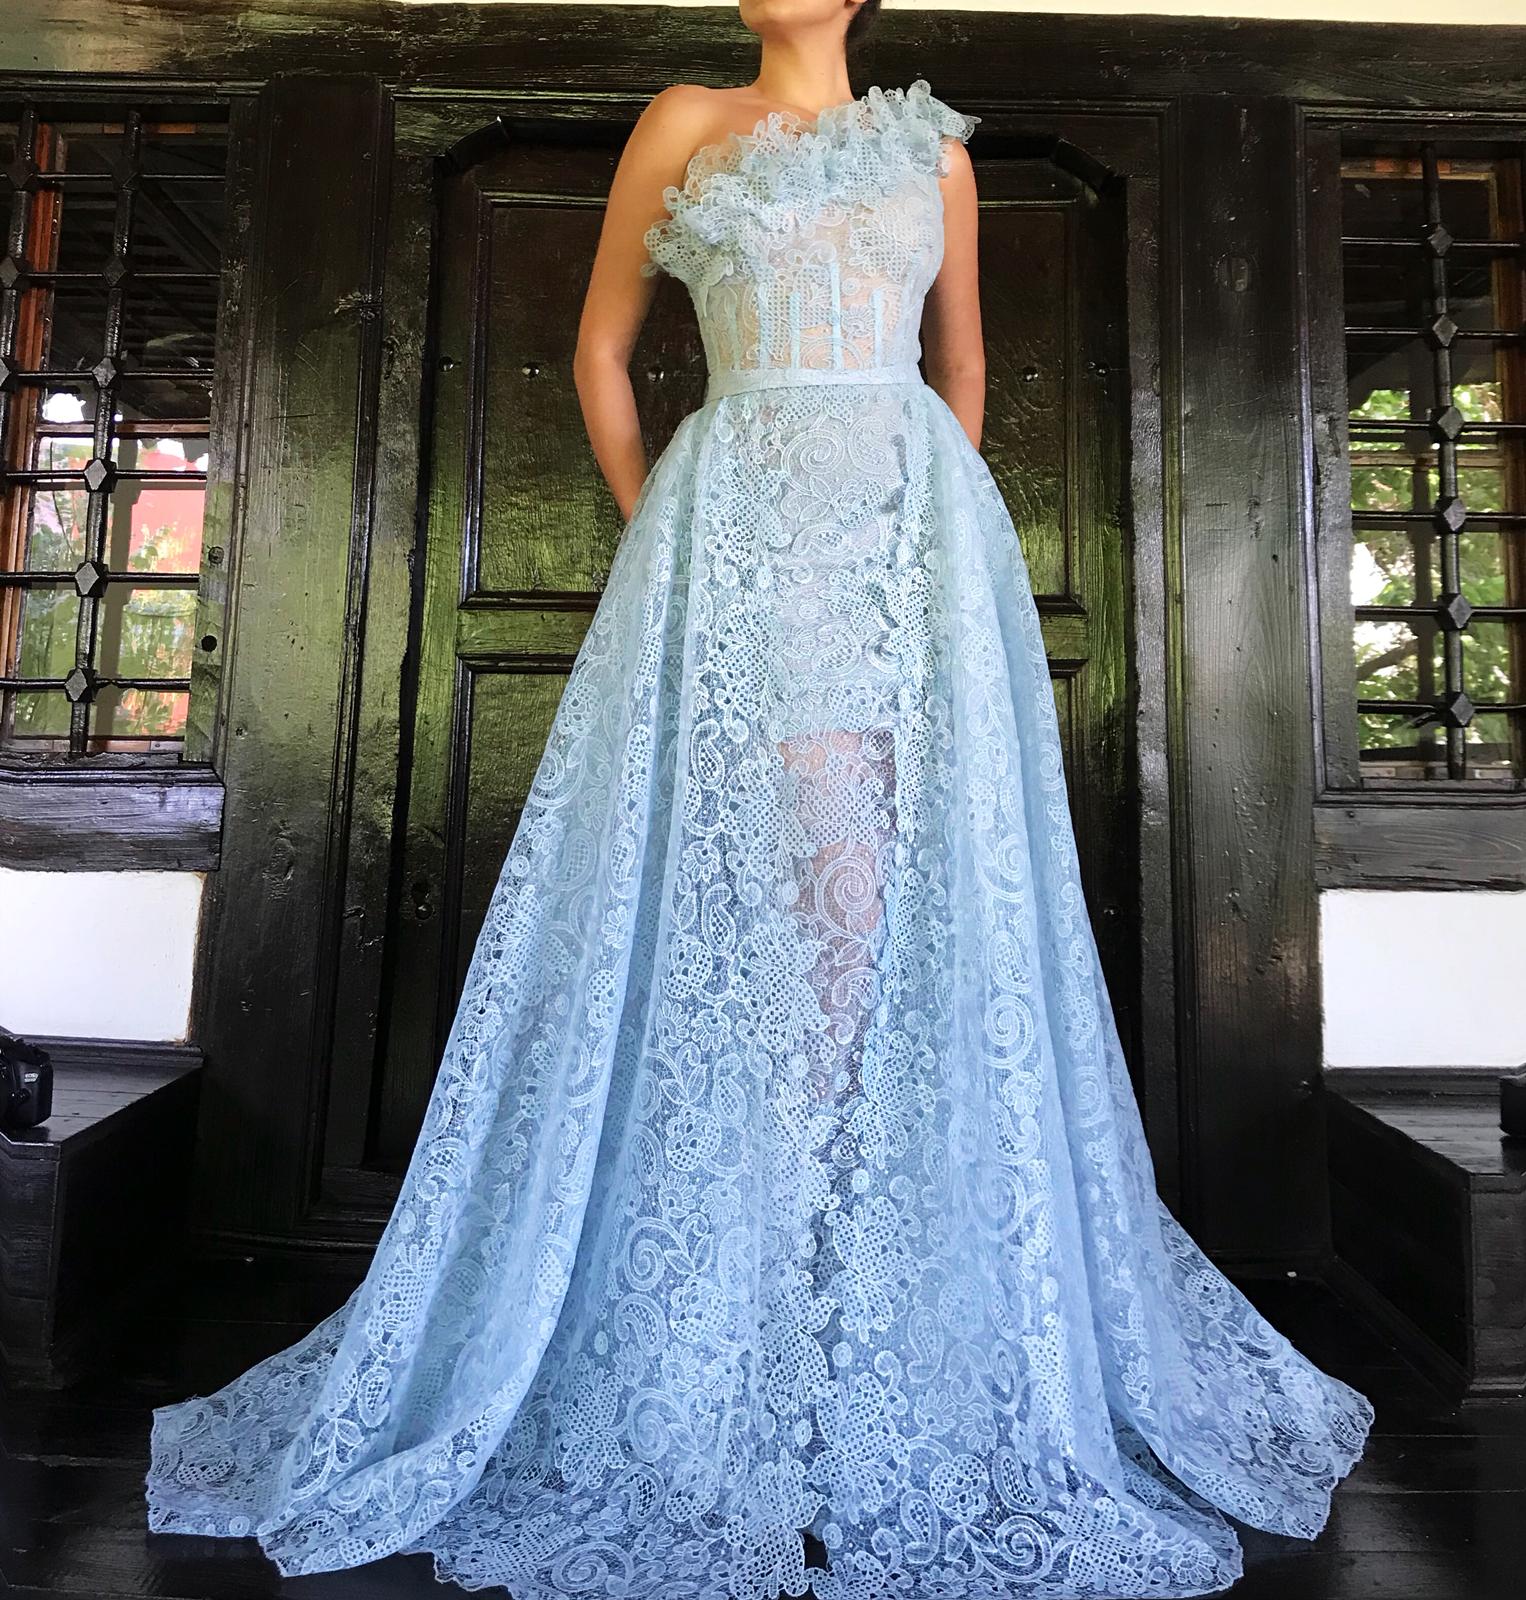 Blue overskirt dress with one shoulder sleeve and lace